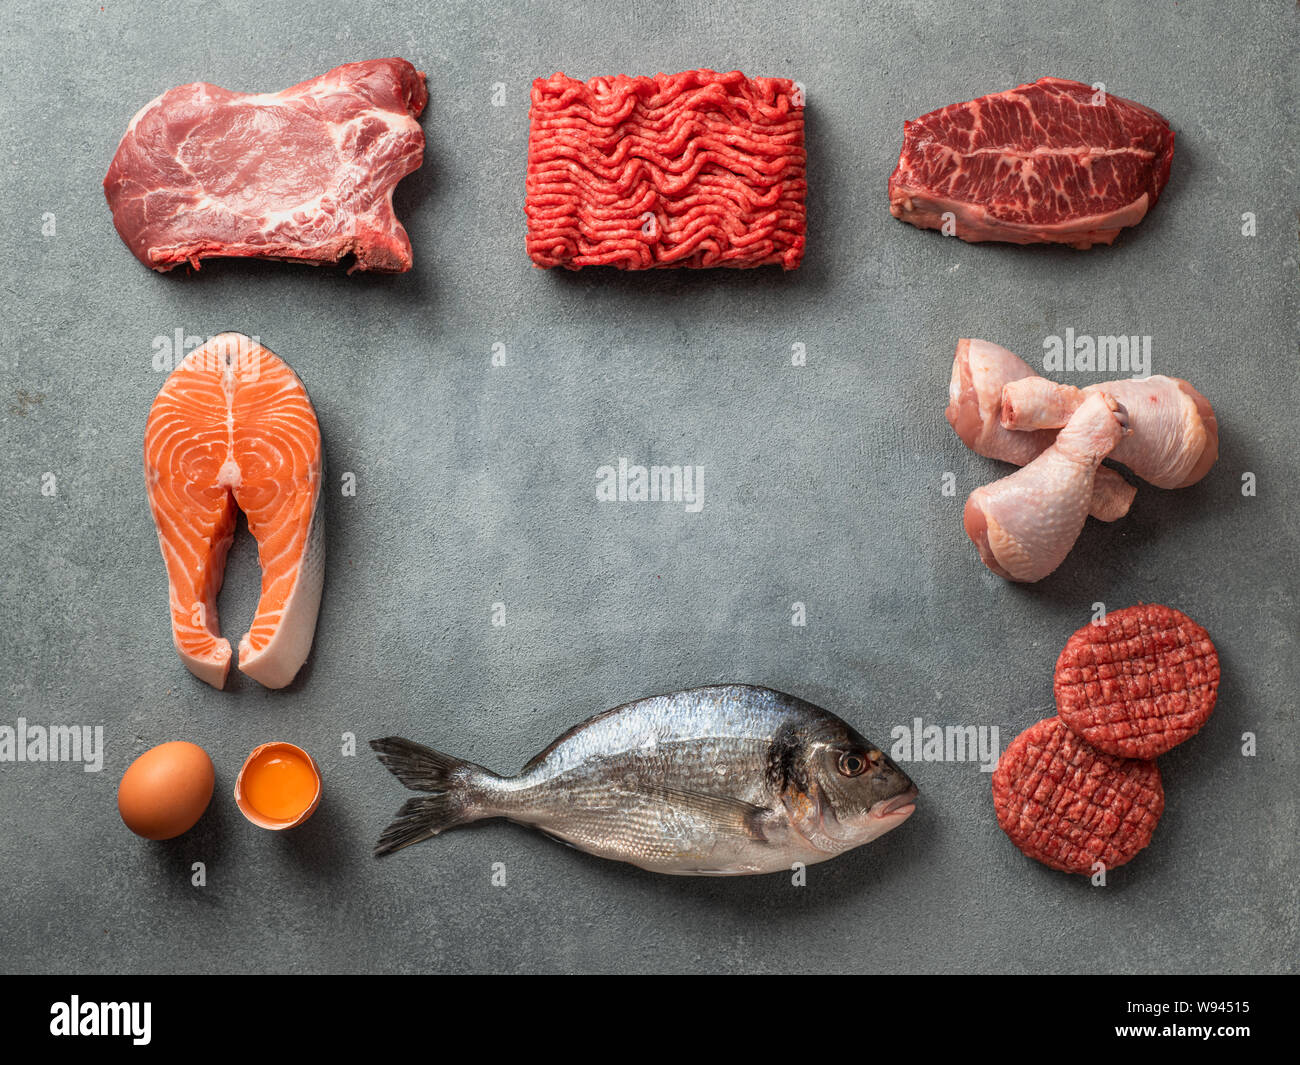 Carnivore or keto diet concept. Raw ingredients for zero carb or low carb diet - meat, poultry, fish, eggs and copy space in center on gray stone back Stock Photo